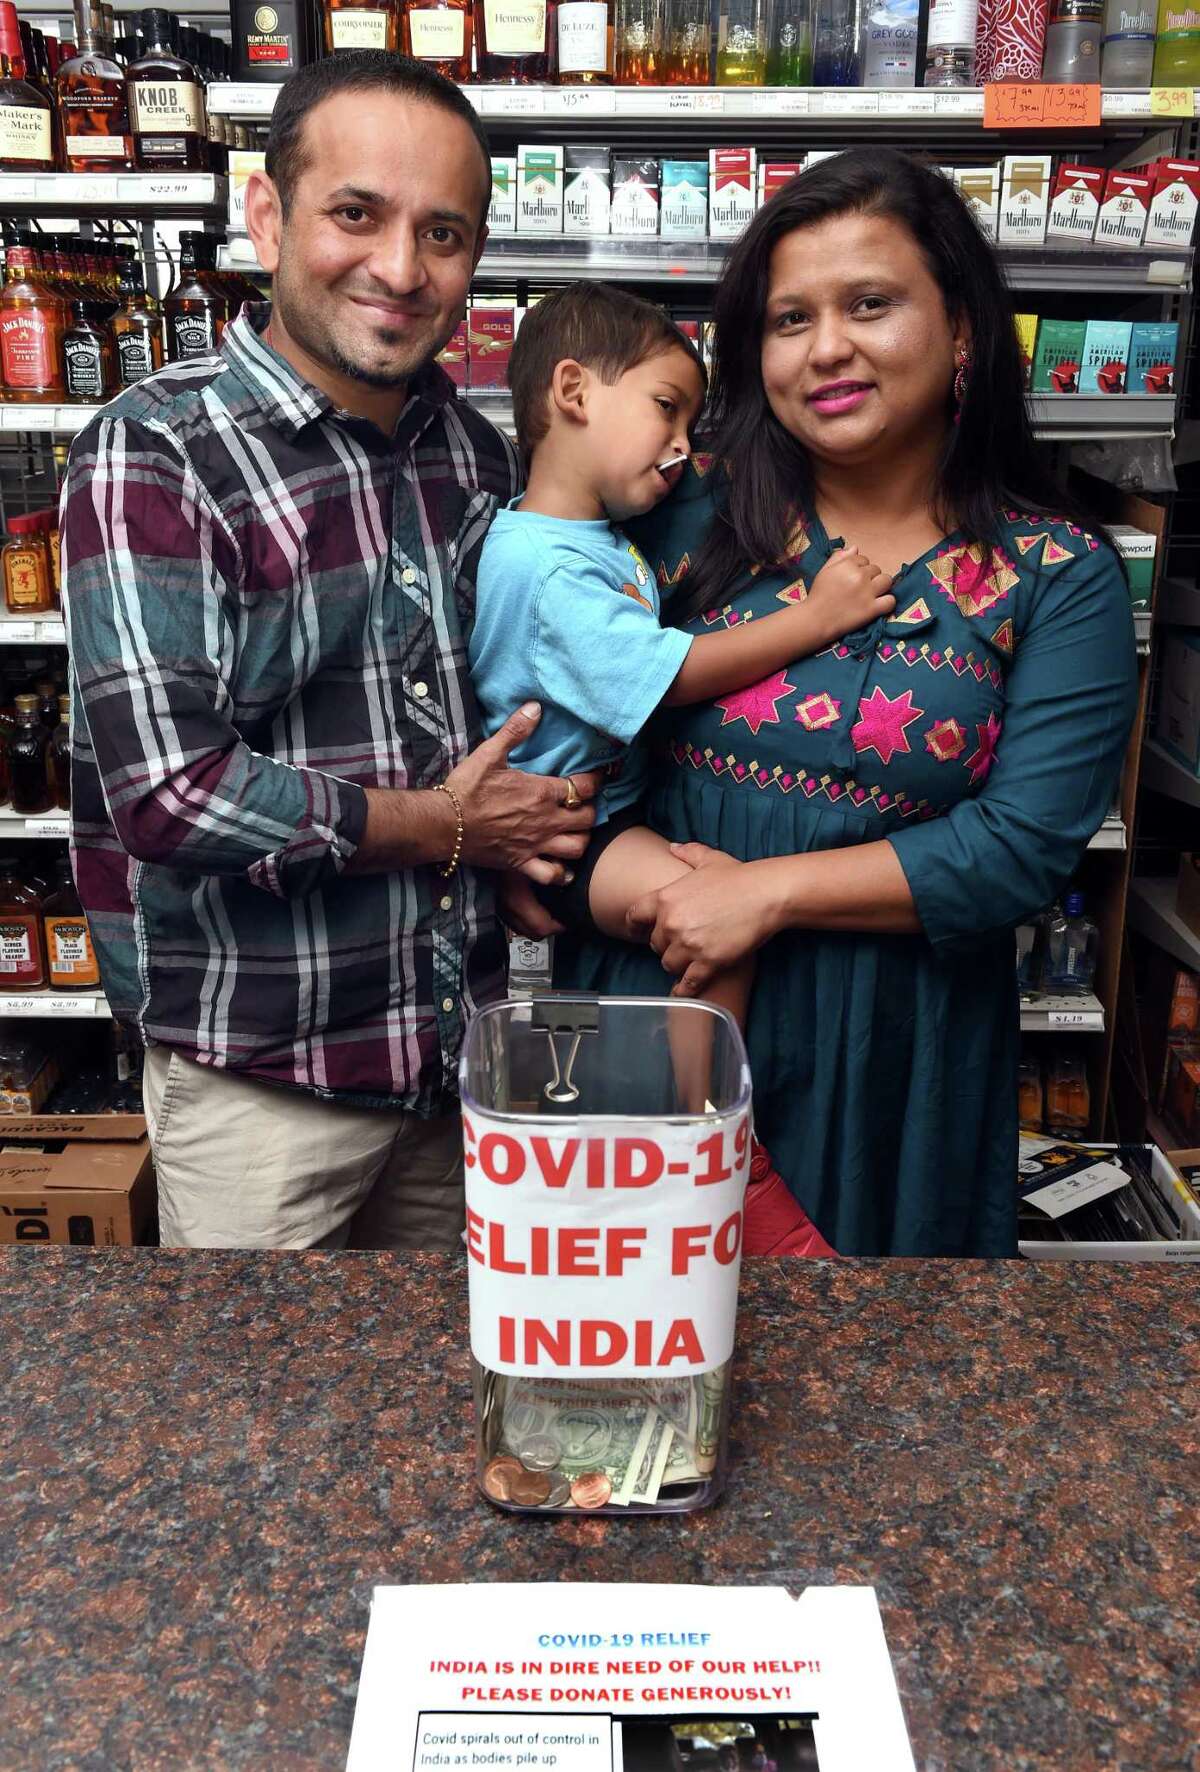 Keyur Patel, left, with his wife, Nital, and son, Ved, 31/2, behind the counter of one of the family’s package stores, Town & Country Liquors in Bethany, May 19, 2021, where he is raising funds and matching donations for COVID-19 relief in India.